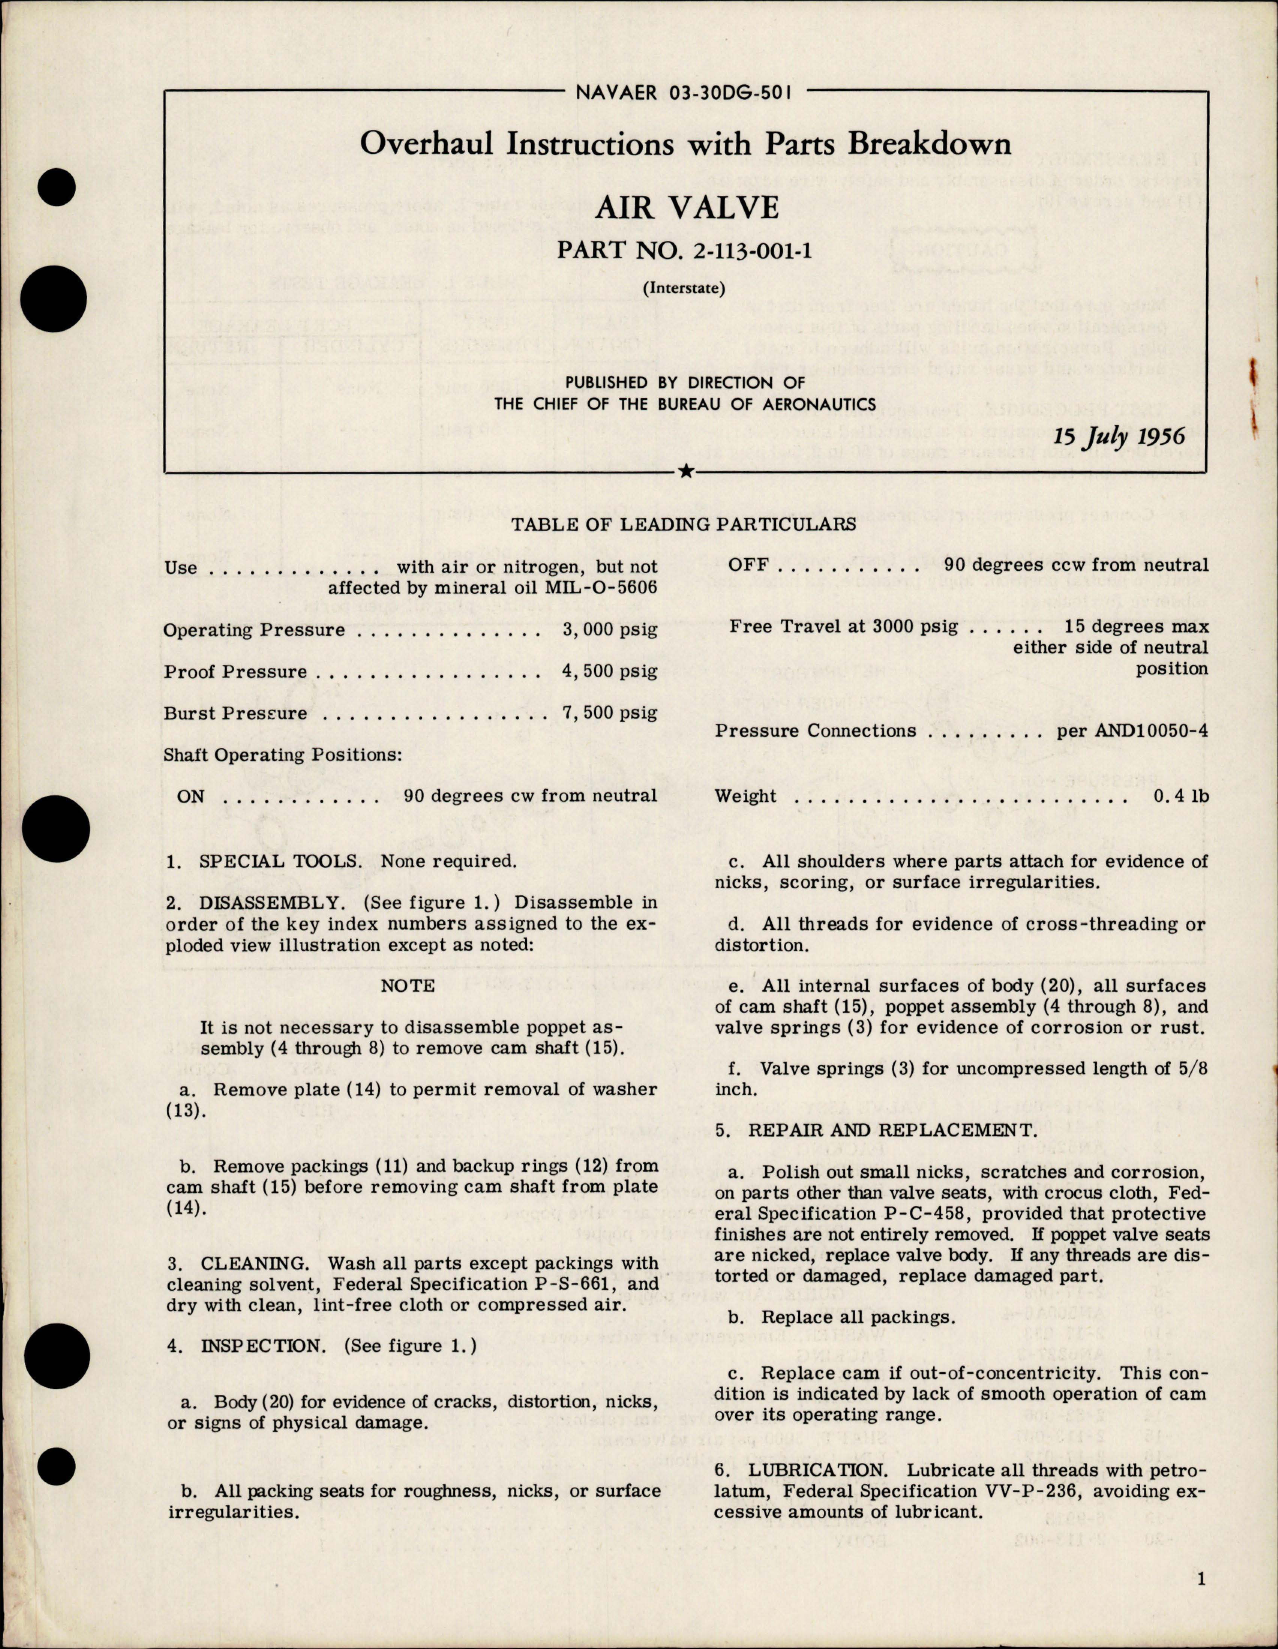 Sample page 1 from AirCorps Library document: Overhaul Instructions with Parts Breakdown for Air Valve - Part 2-113-001-1 